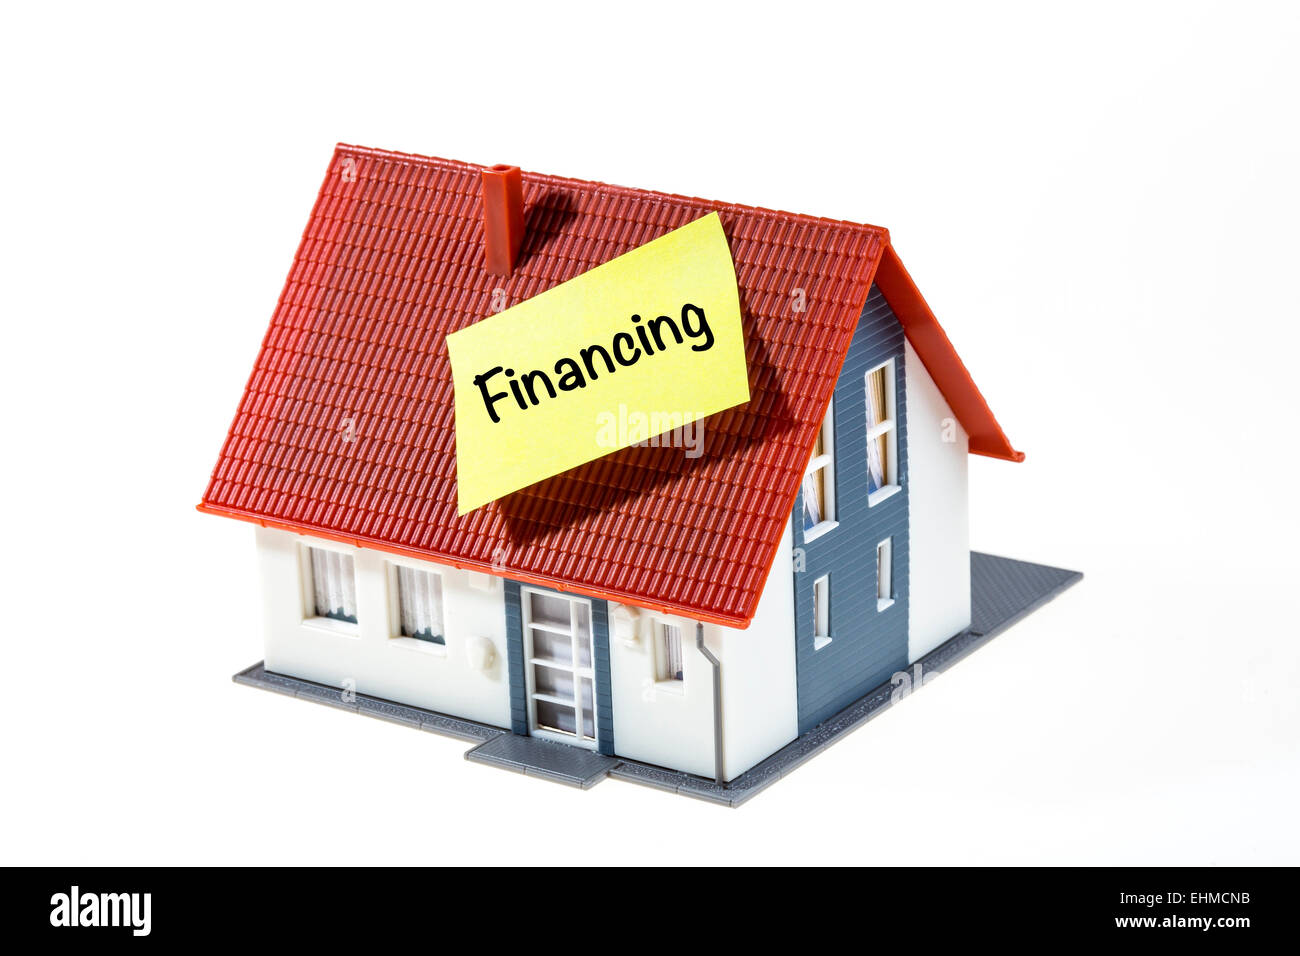 Symbolic image, house with a Post-it note, financing Stock Photo